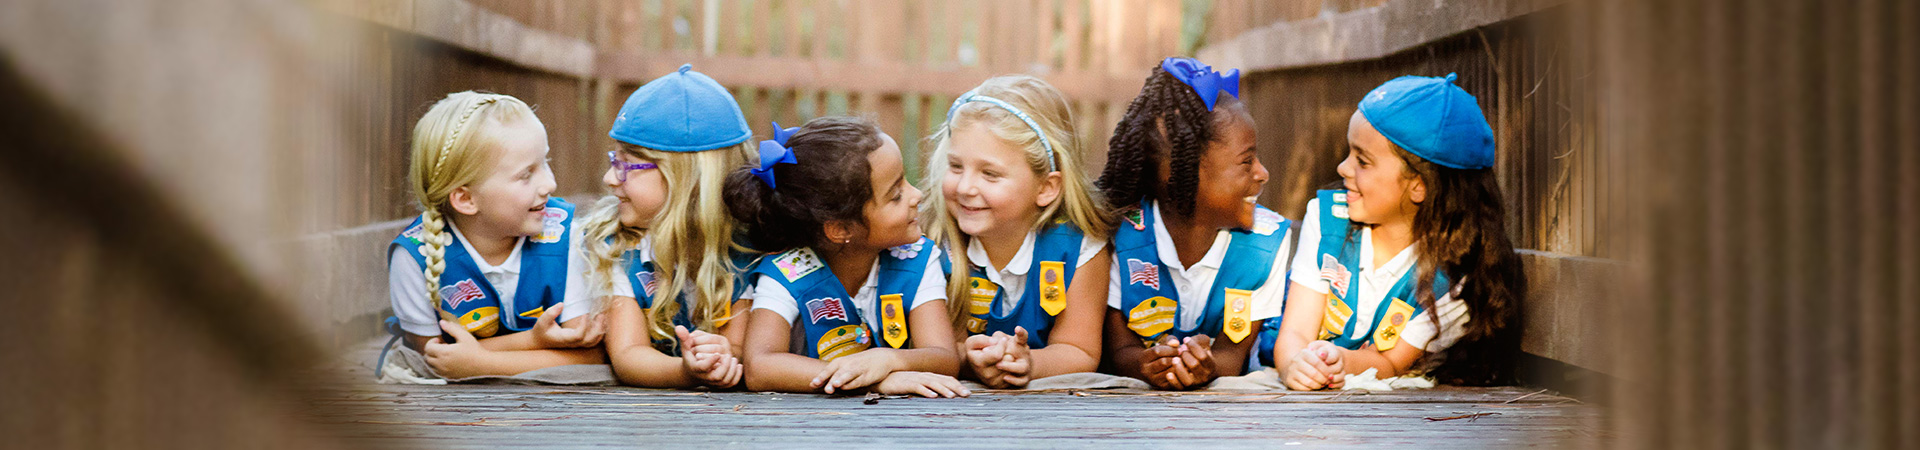  group of daisy girl scouts laying on boardwalk smiling at each other wearing daisy uniform vests, aprons, and hats. 